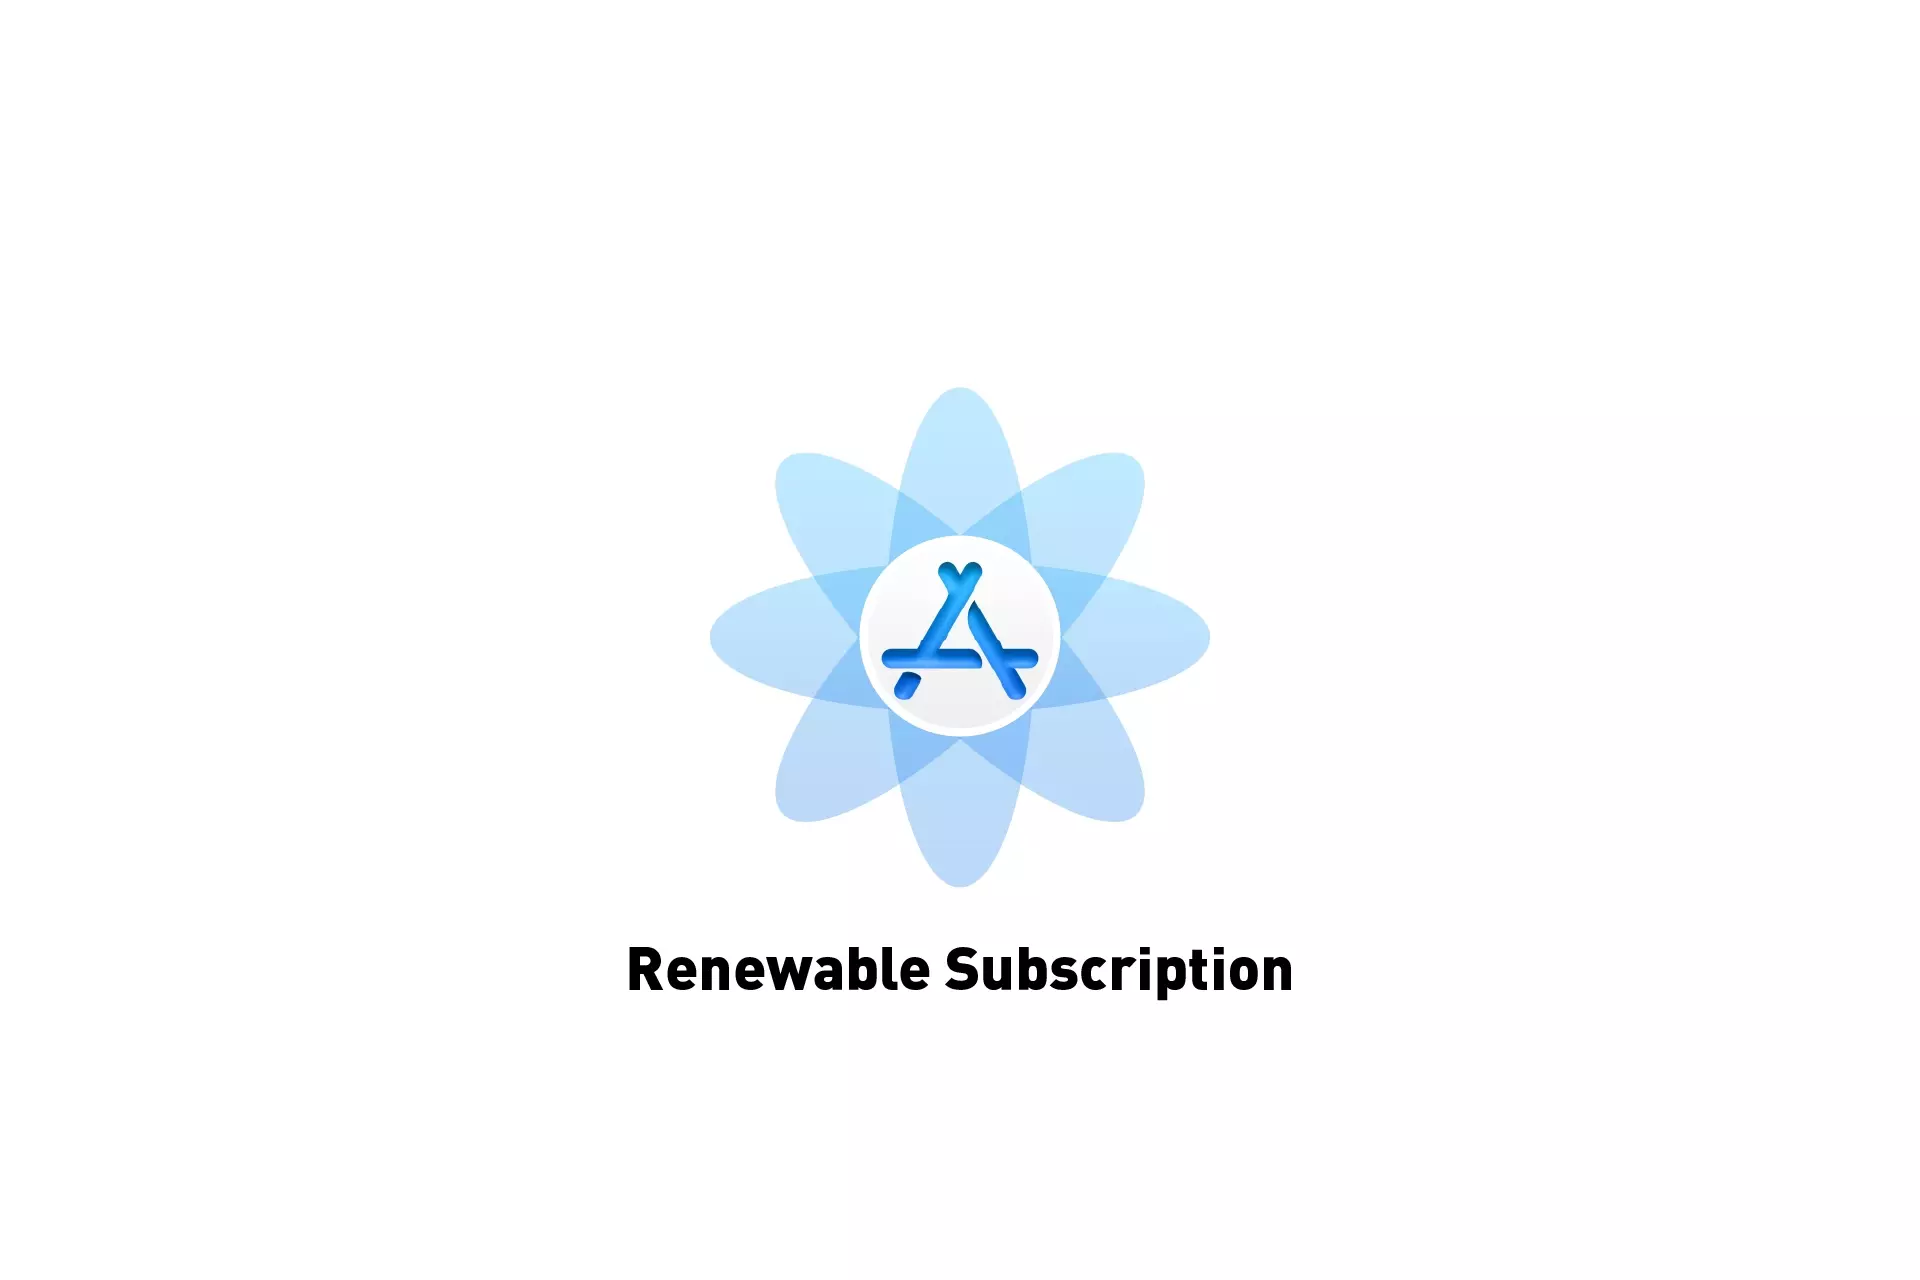 A flower that represents App Store Connect with the text "Renewable Subscription" beneath it.